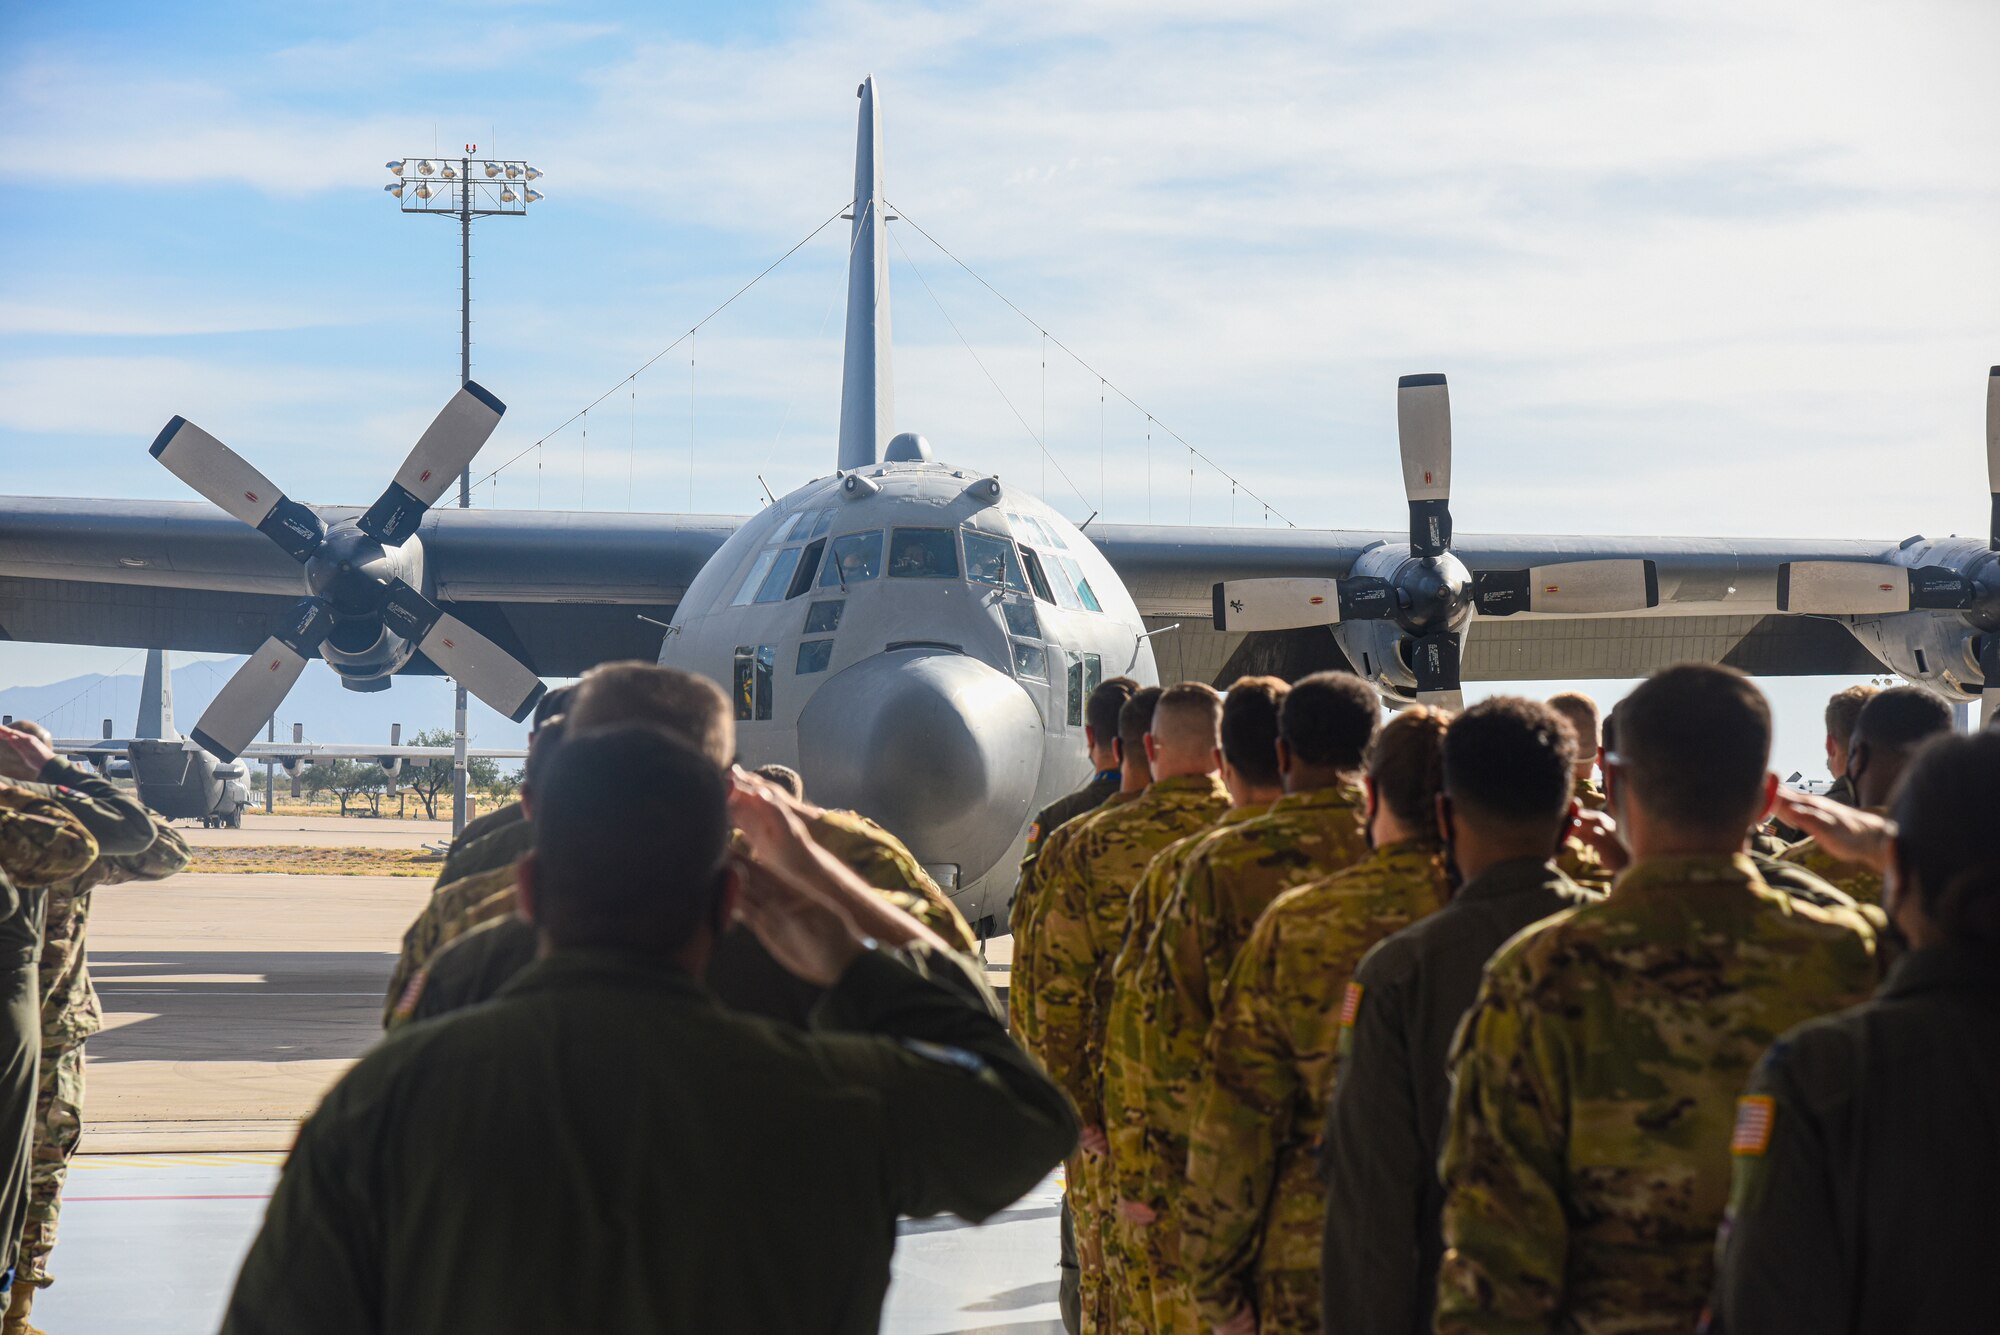 Pictured above is a group of people saluting a parked aircraft.